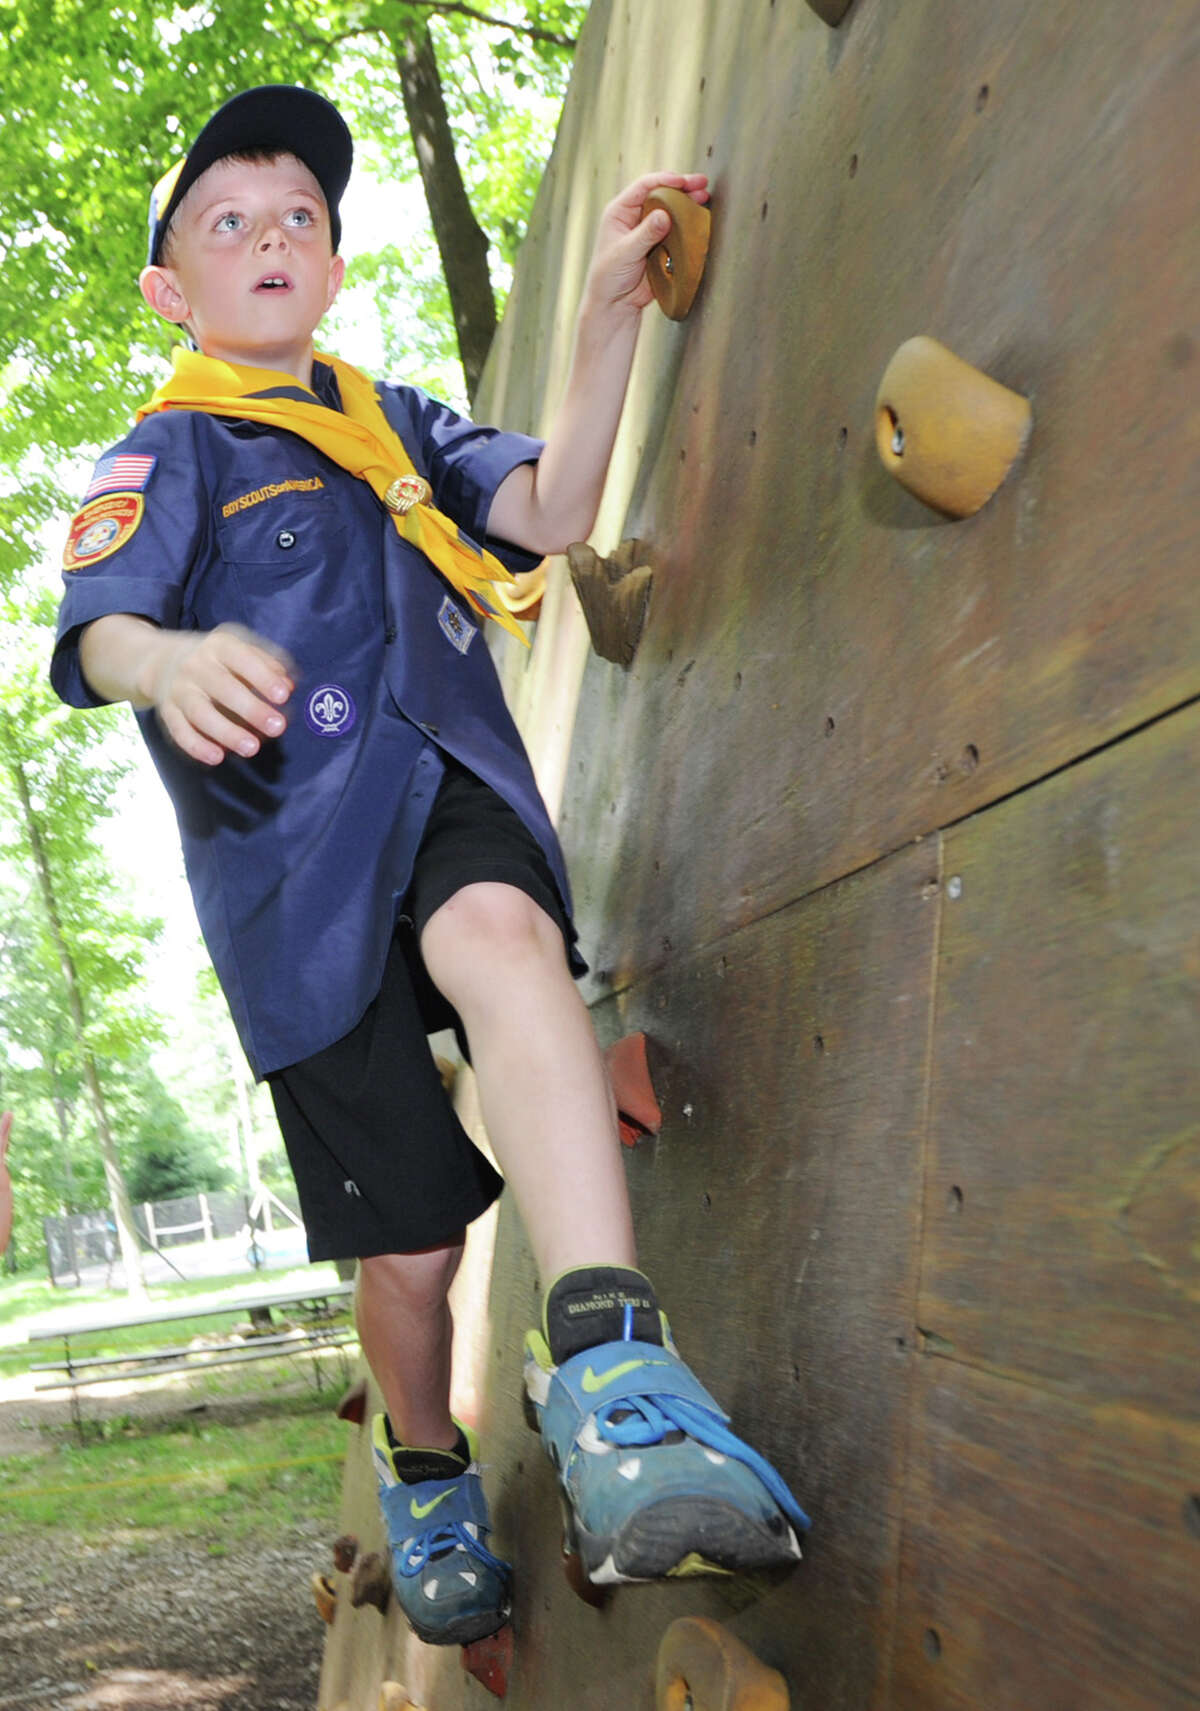 Greenwich Cub Scout Carter Simko, 8, navigates a climbing wall at the Ernest Thompson Seton Reservation in Greenwich, Thursday, July 5, 2012. The Greenwich Council of the Boy Scouts of America is located at the reservation and is celebrating its 100th anniversary July 12.